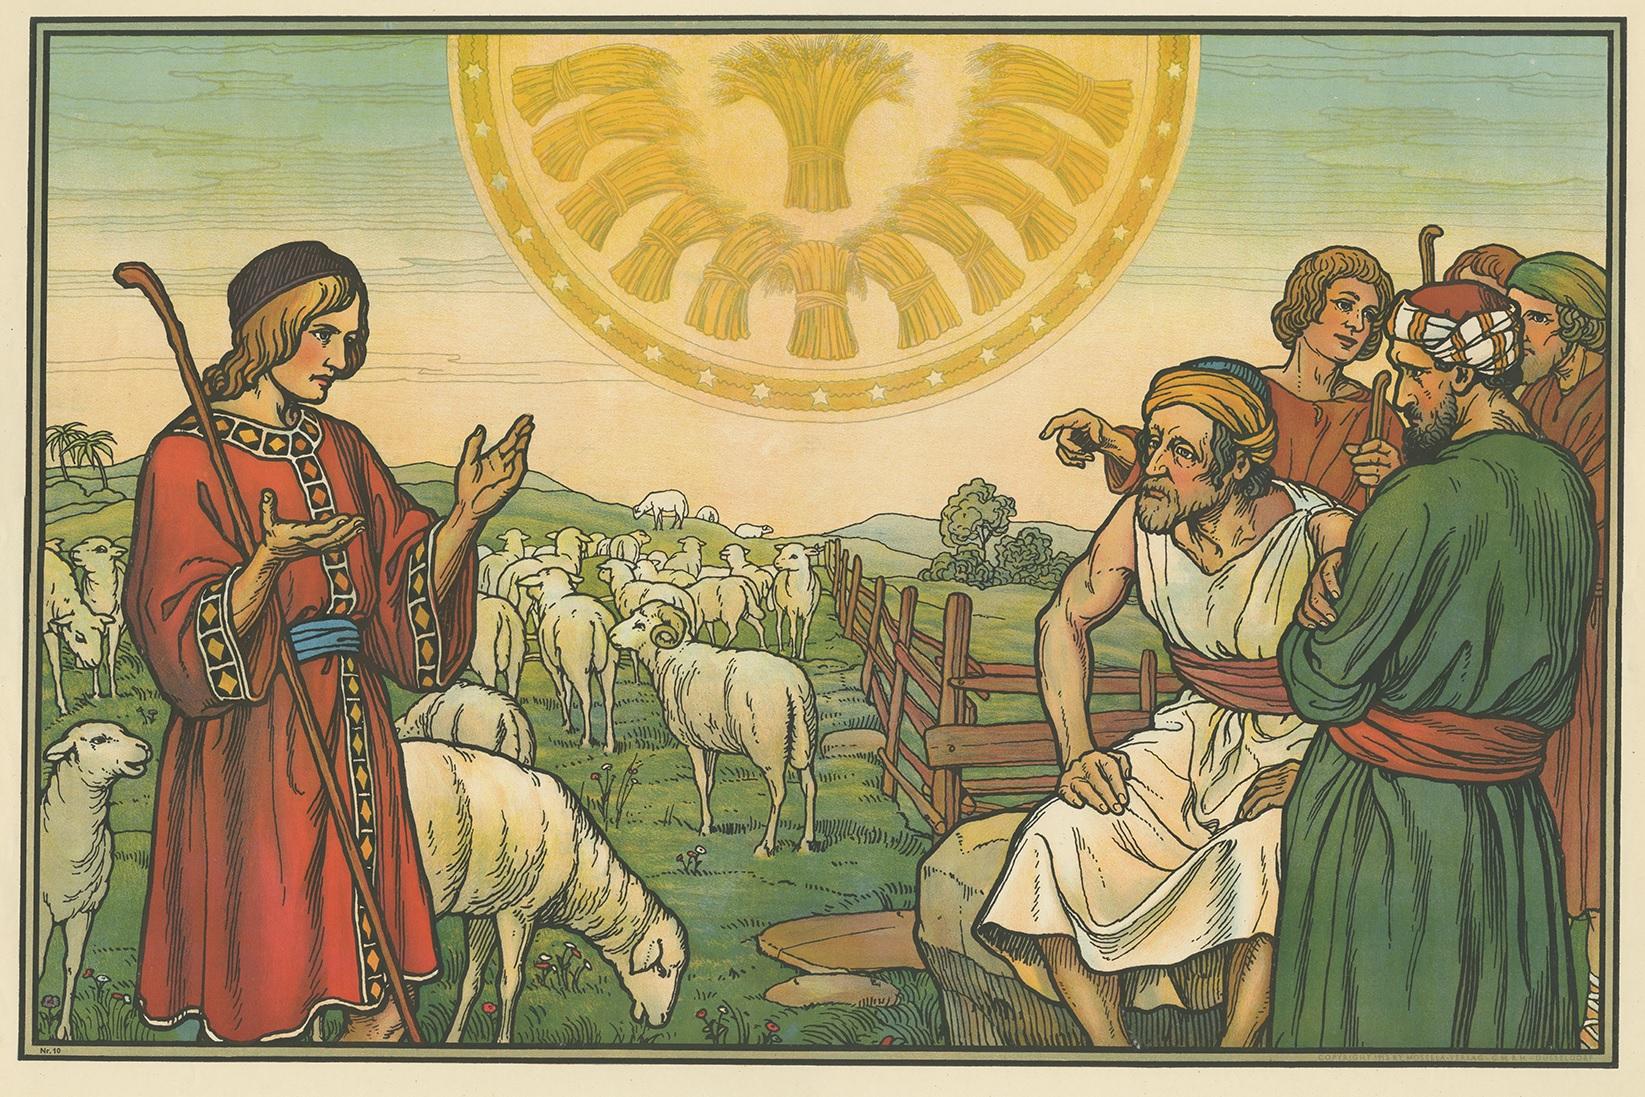 Large antique print of Joseph's Dream. Published by Mosella-Verlag, 1913. This print originates from a series titled 'Kathol. Schulbibelwerk von Dr. Ecker'.